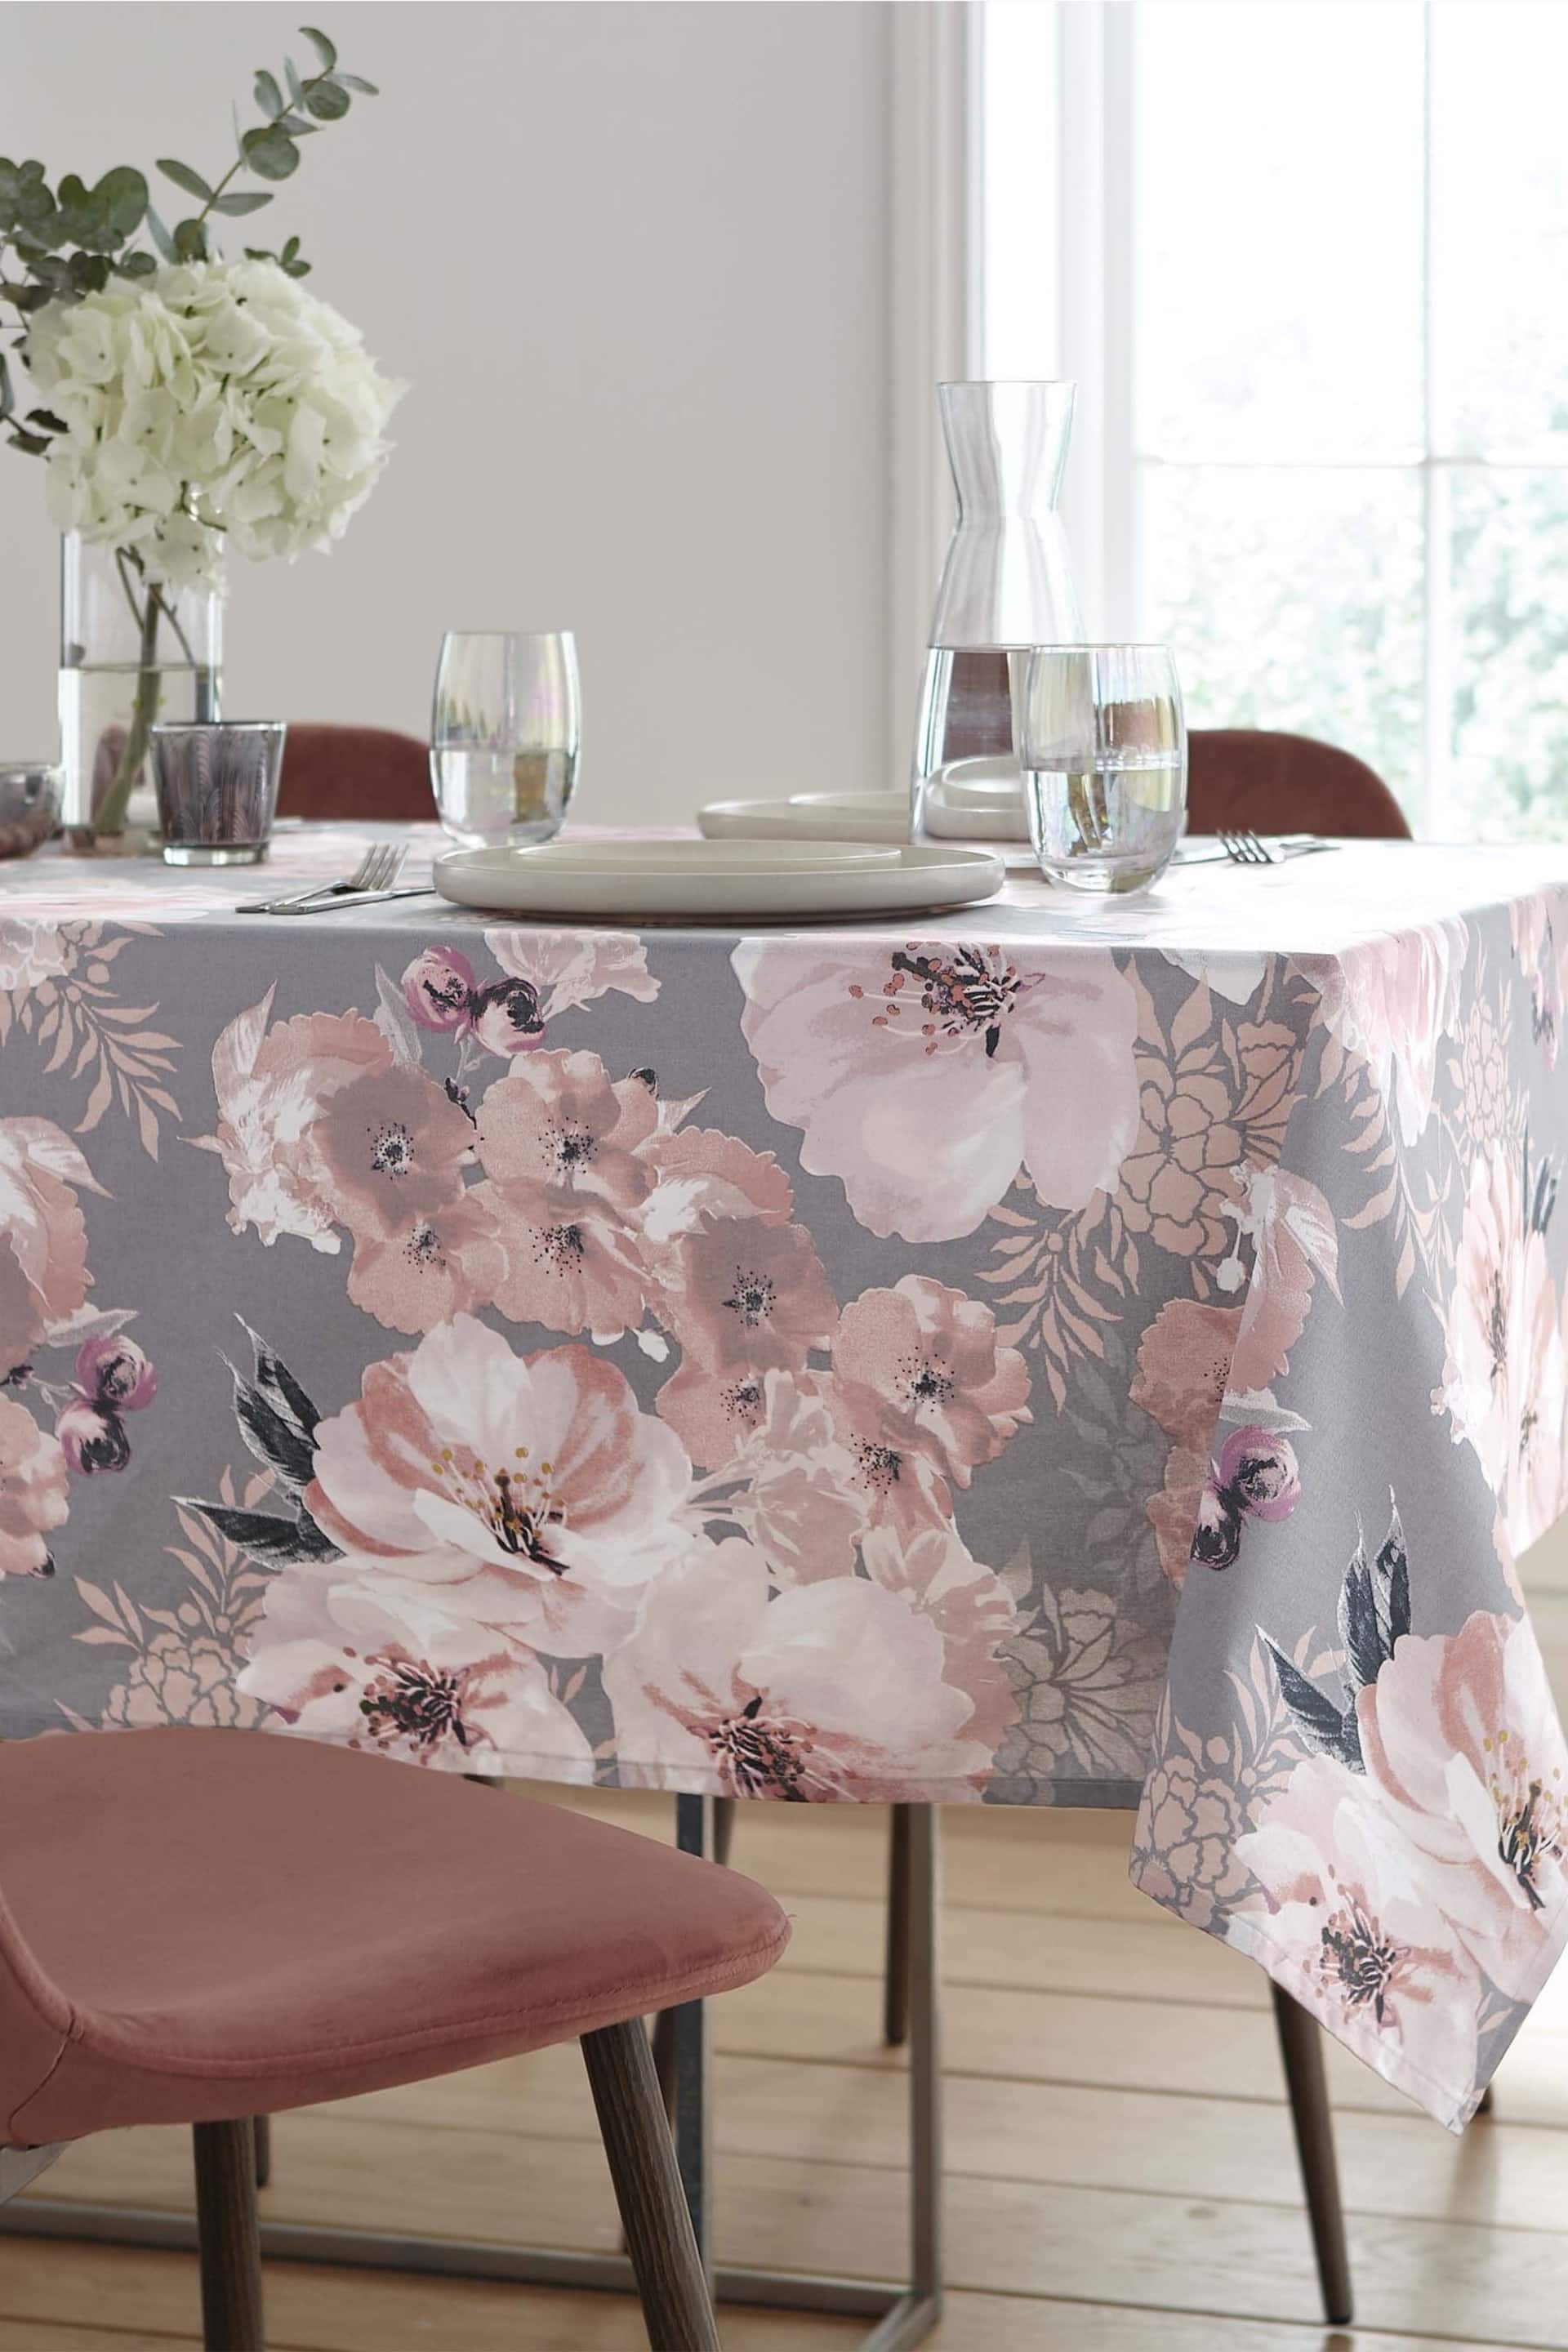 Catherine Lansfield Grey Dramatic Floral Table Cloth - Image 1 of 2